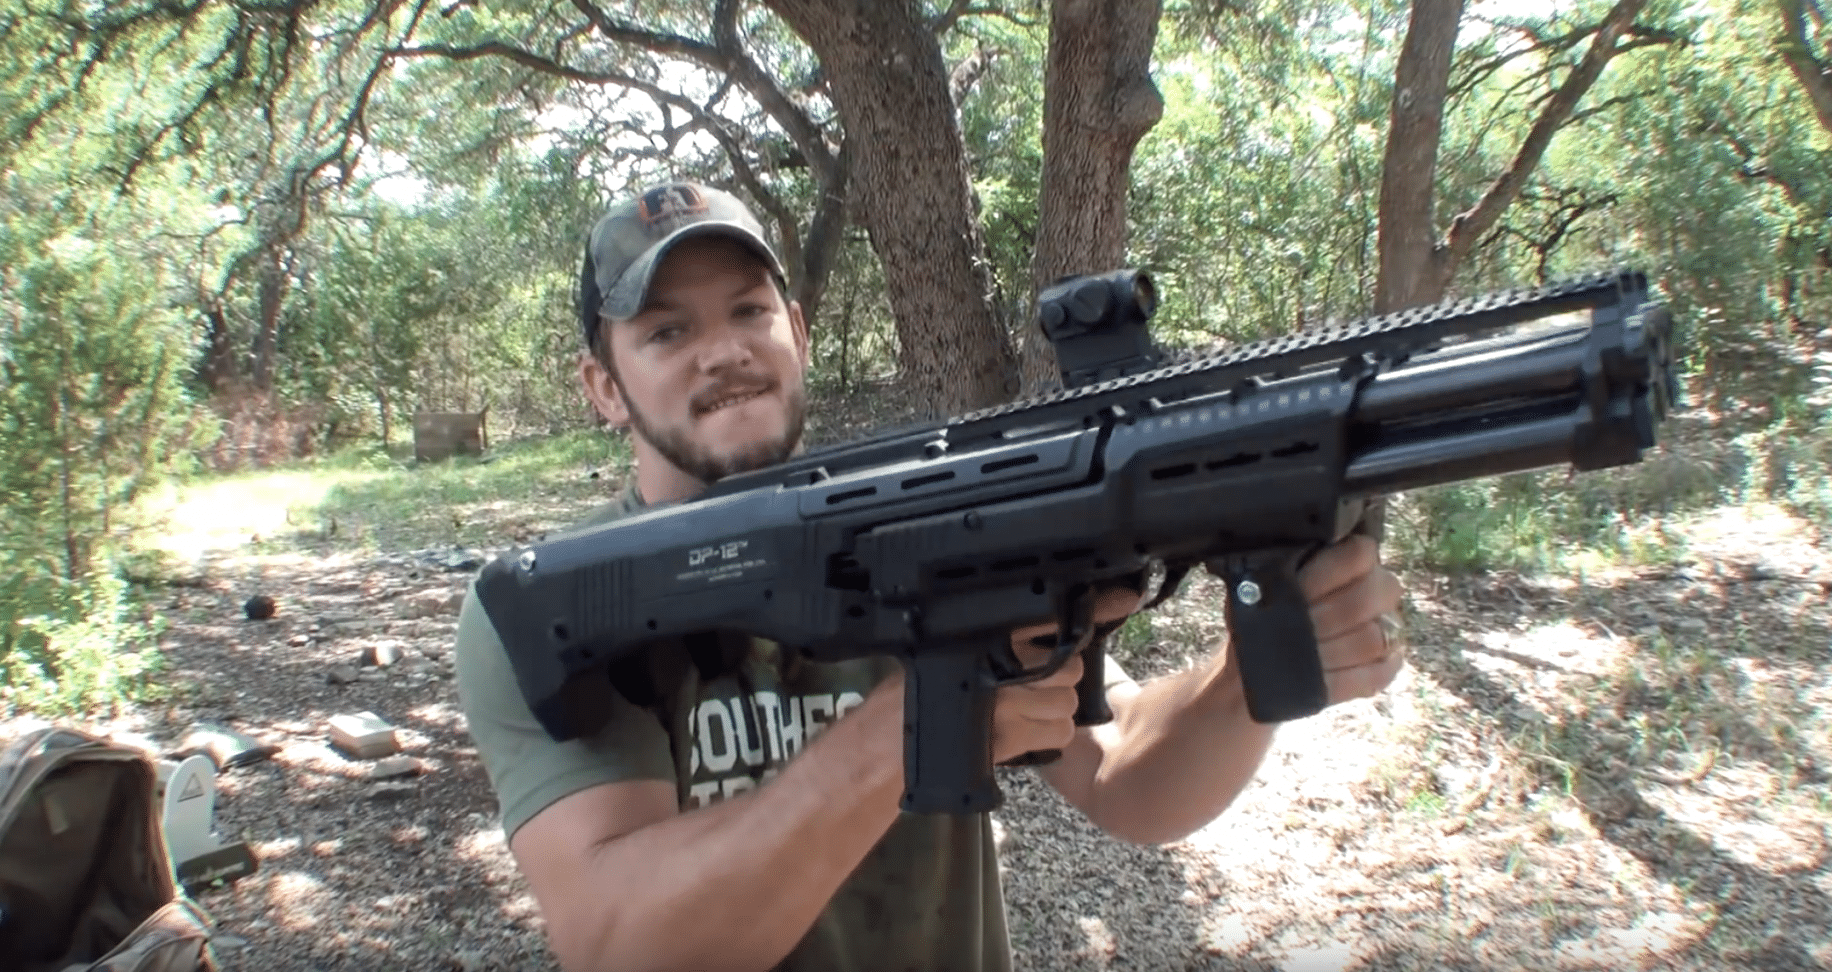 See the 'Triple Double' 6 barrel shotgun in action! | American Military ...